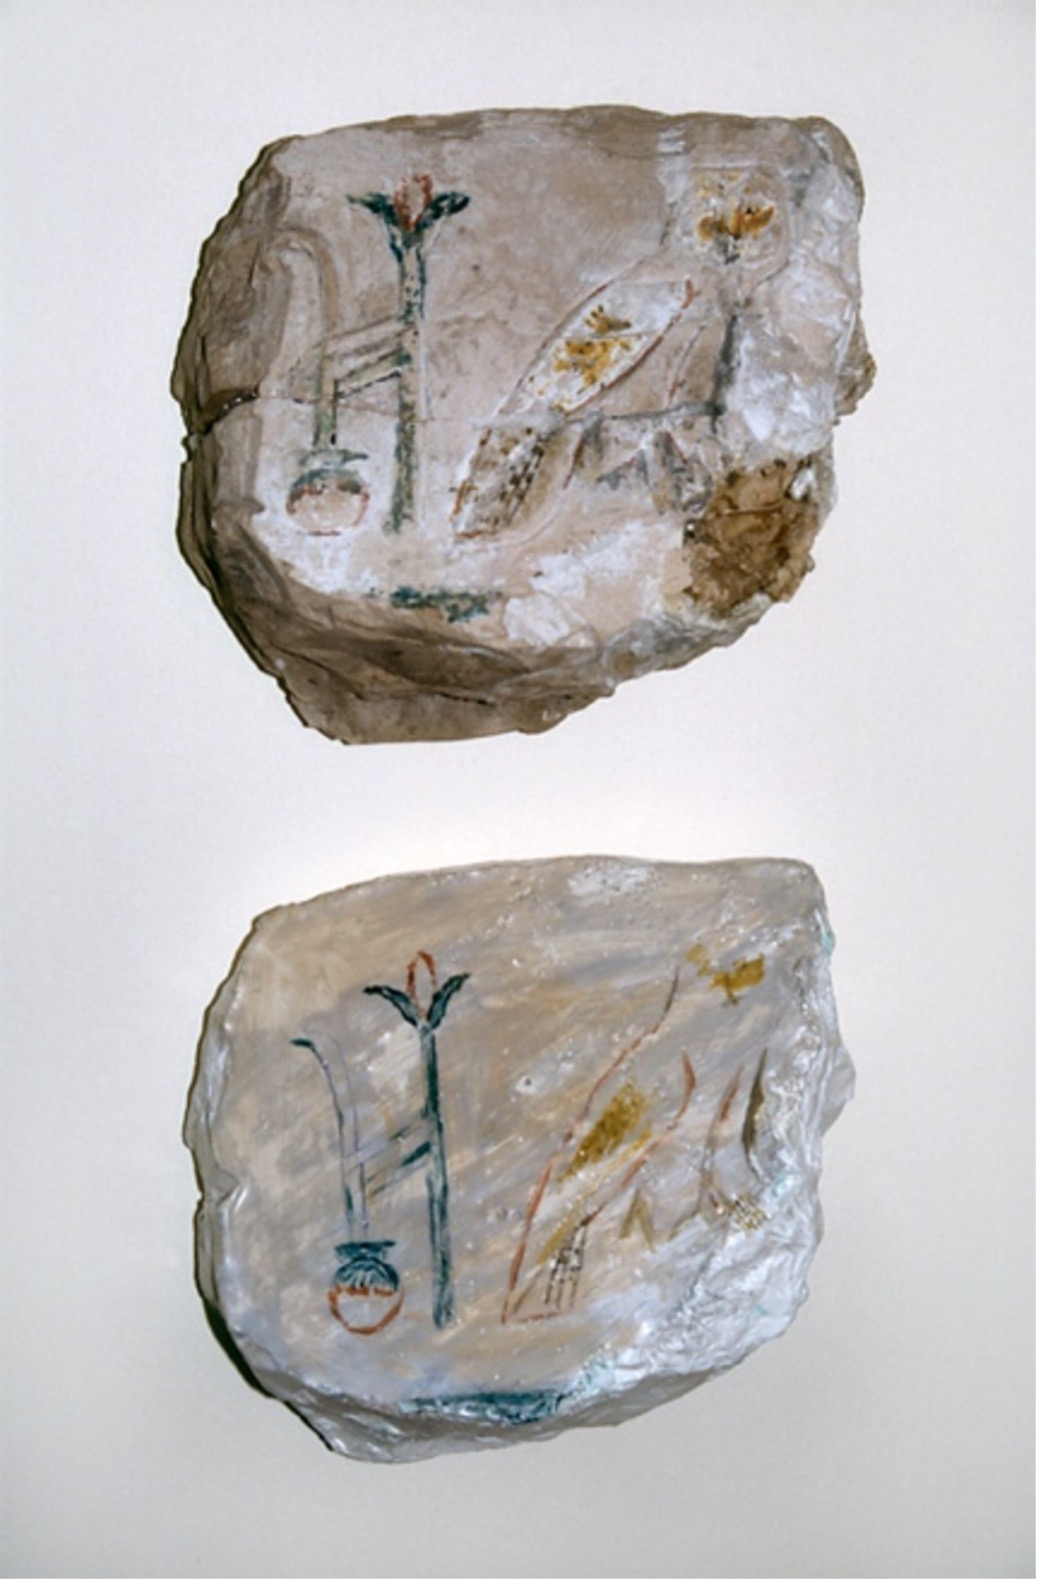 Image of limestone fragment 1999.001.033A and its plaster cast